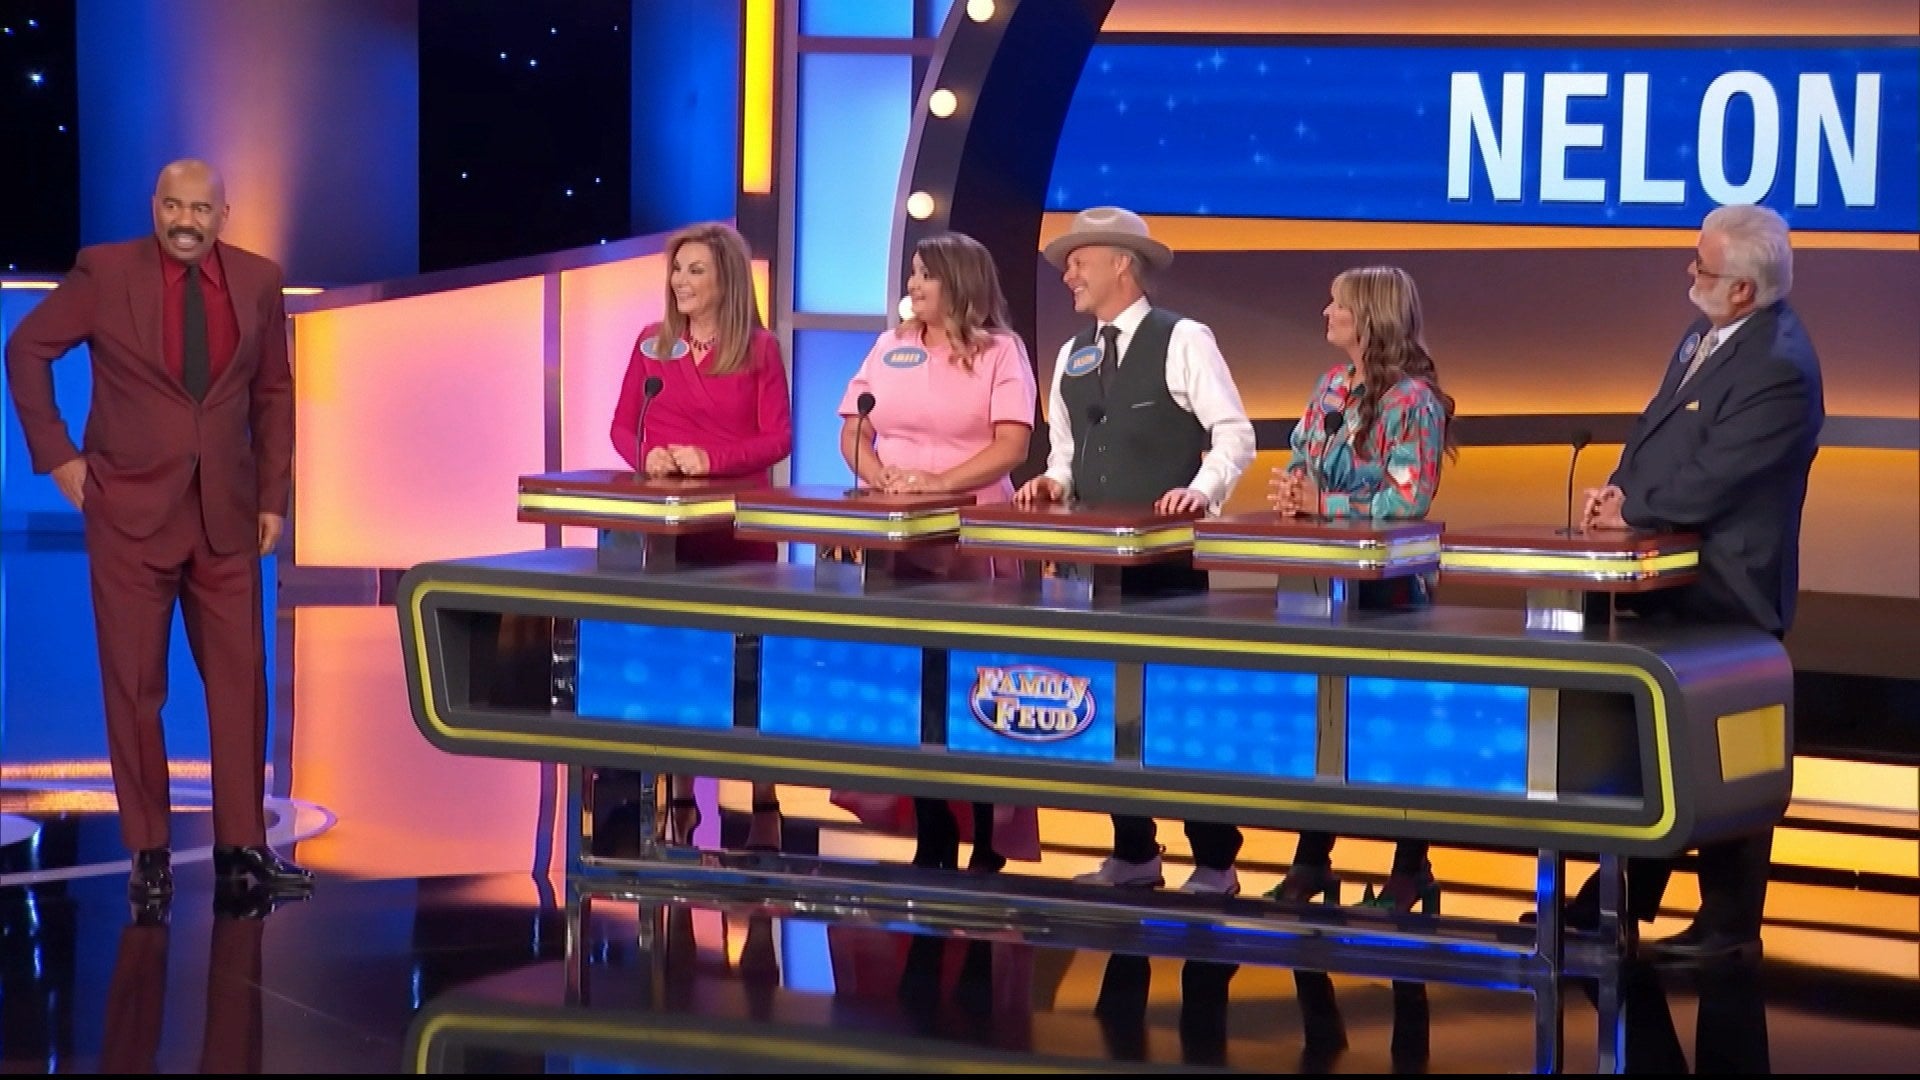 A Look Back at The Nelons’ Appearance on 'Family Feud'